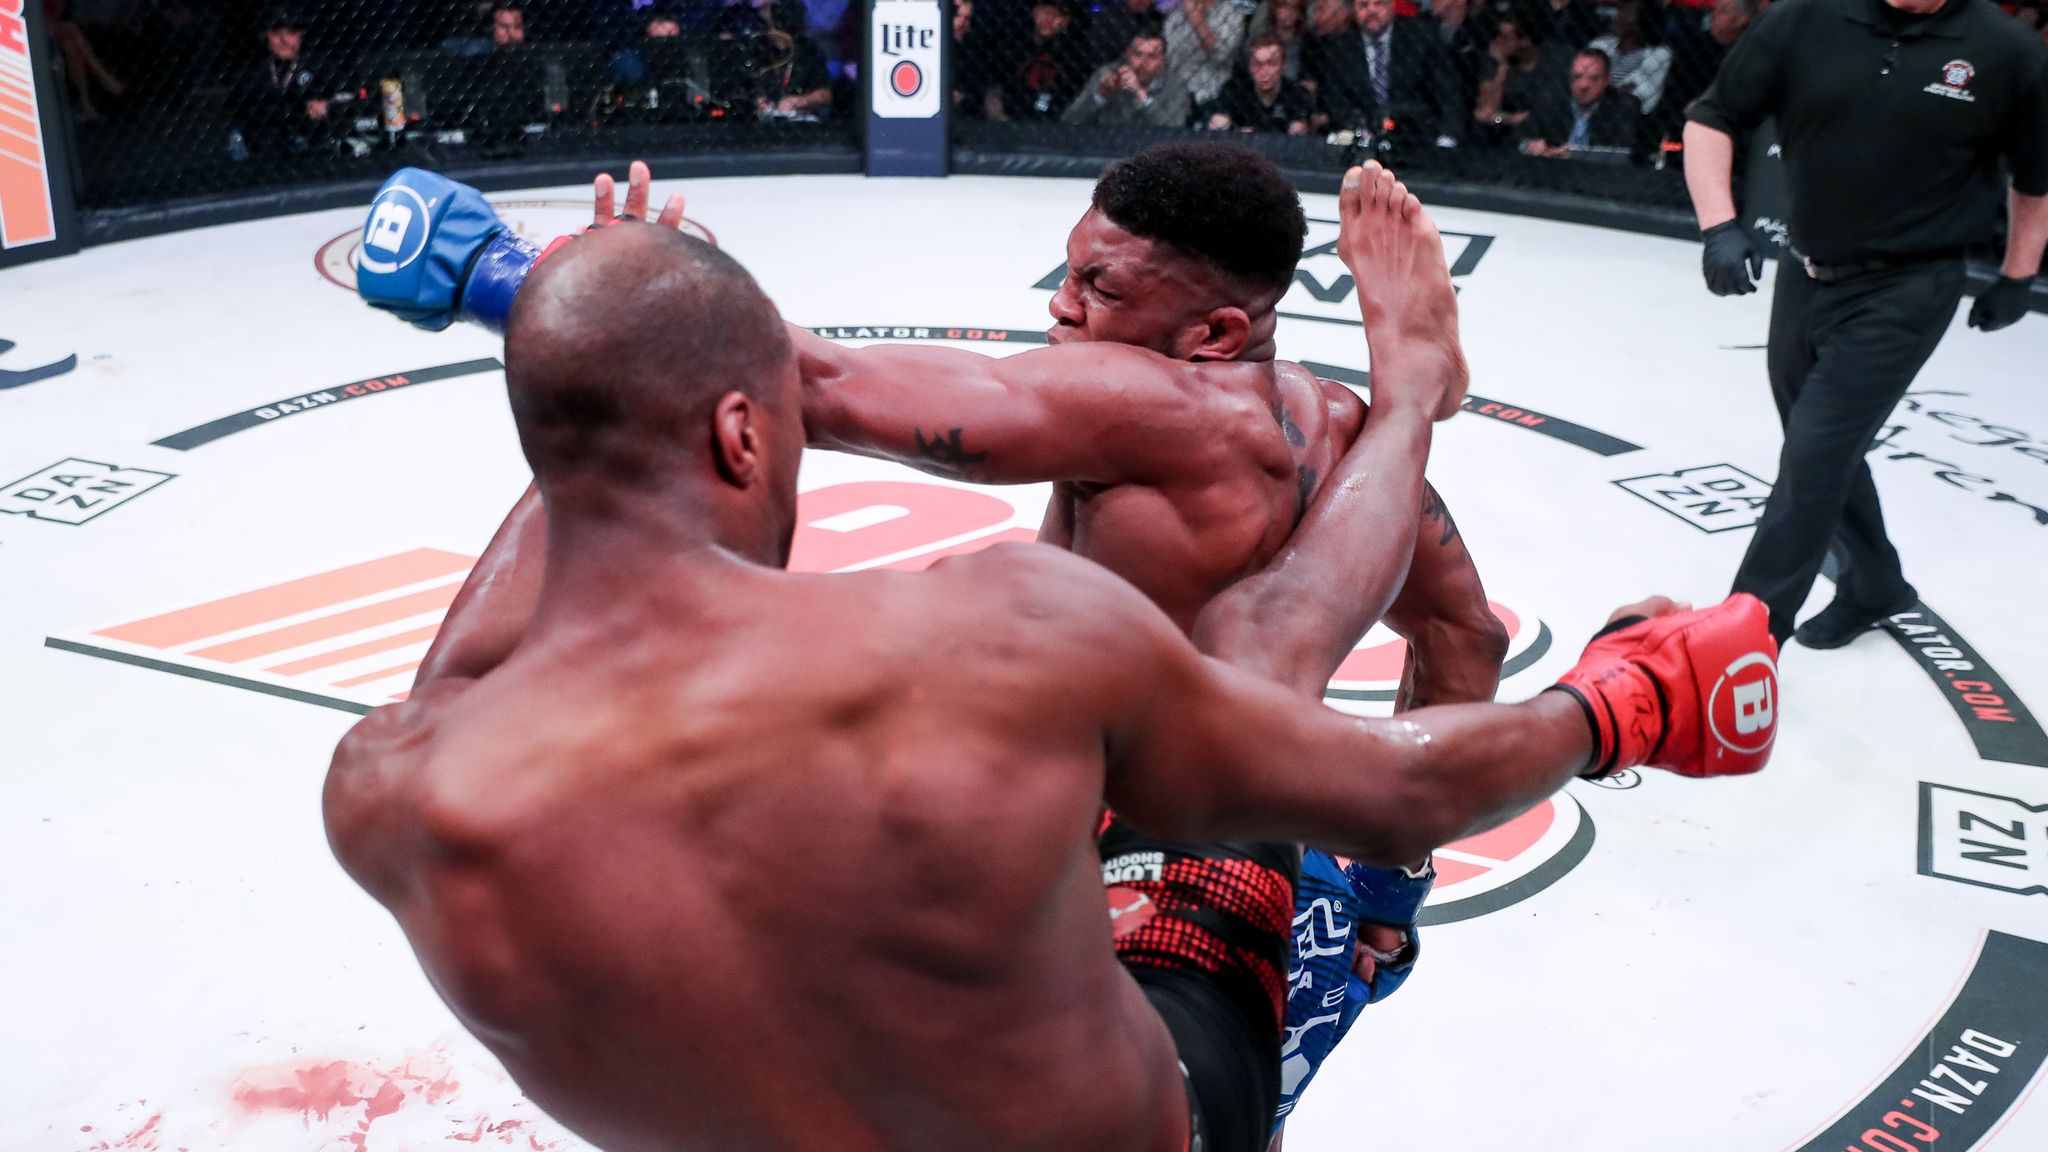 Michael Venom Page outpoints Paul Daley in Bellator MMA fight News Sky Sports